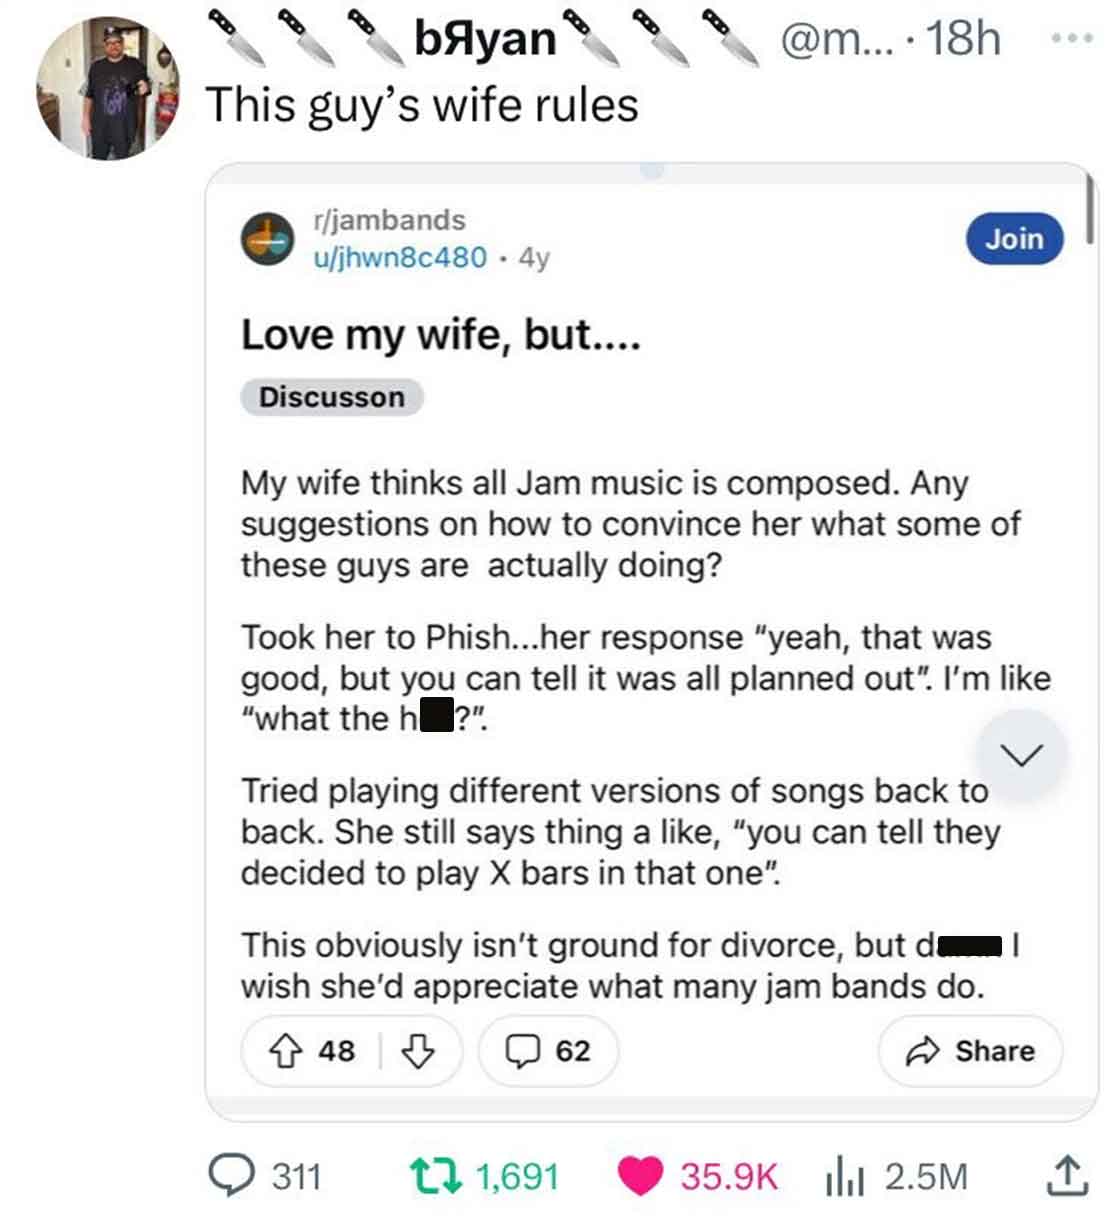 web page - byan This guy's wife rules rjambands ujhwn8c480 4y Love my wife, but.... Discusson My wife thinks all Jam music is composed. Any suggestions on how to convince her what some of these guys are actually doing? ....18h Took her to Phish...her resp